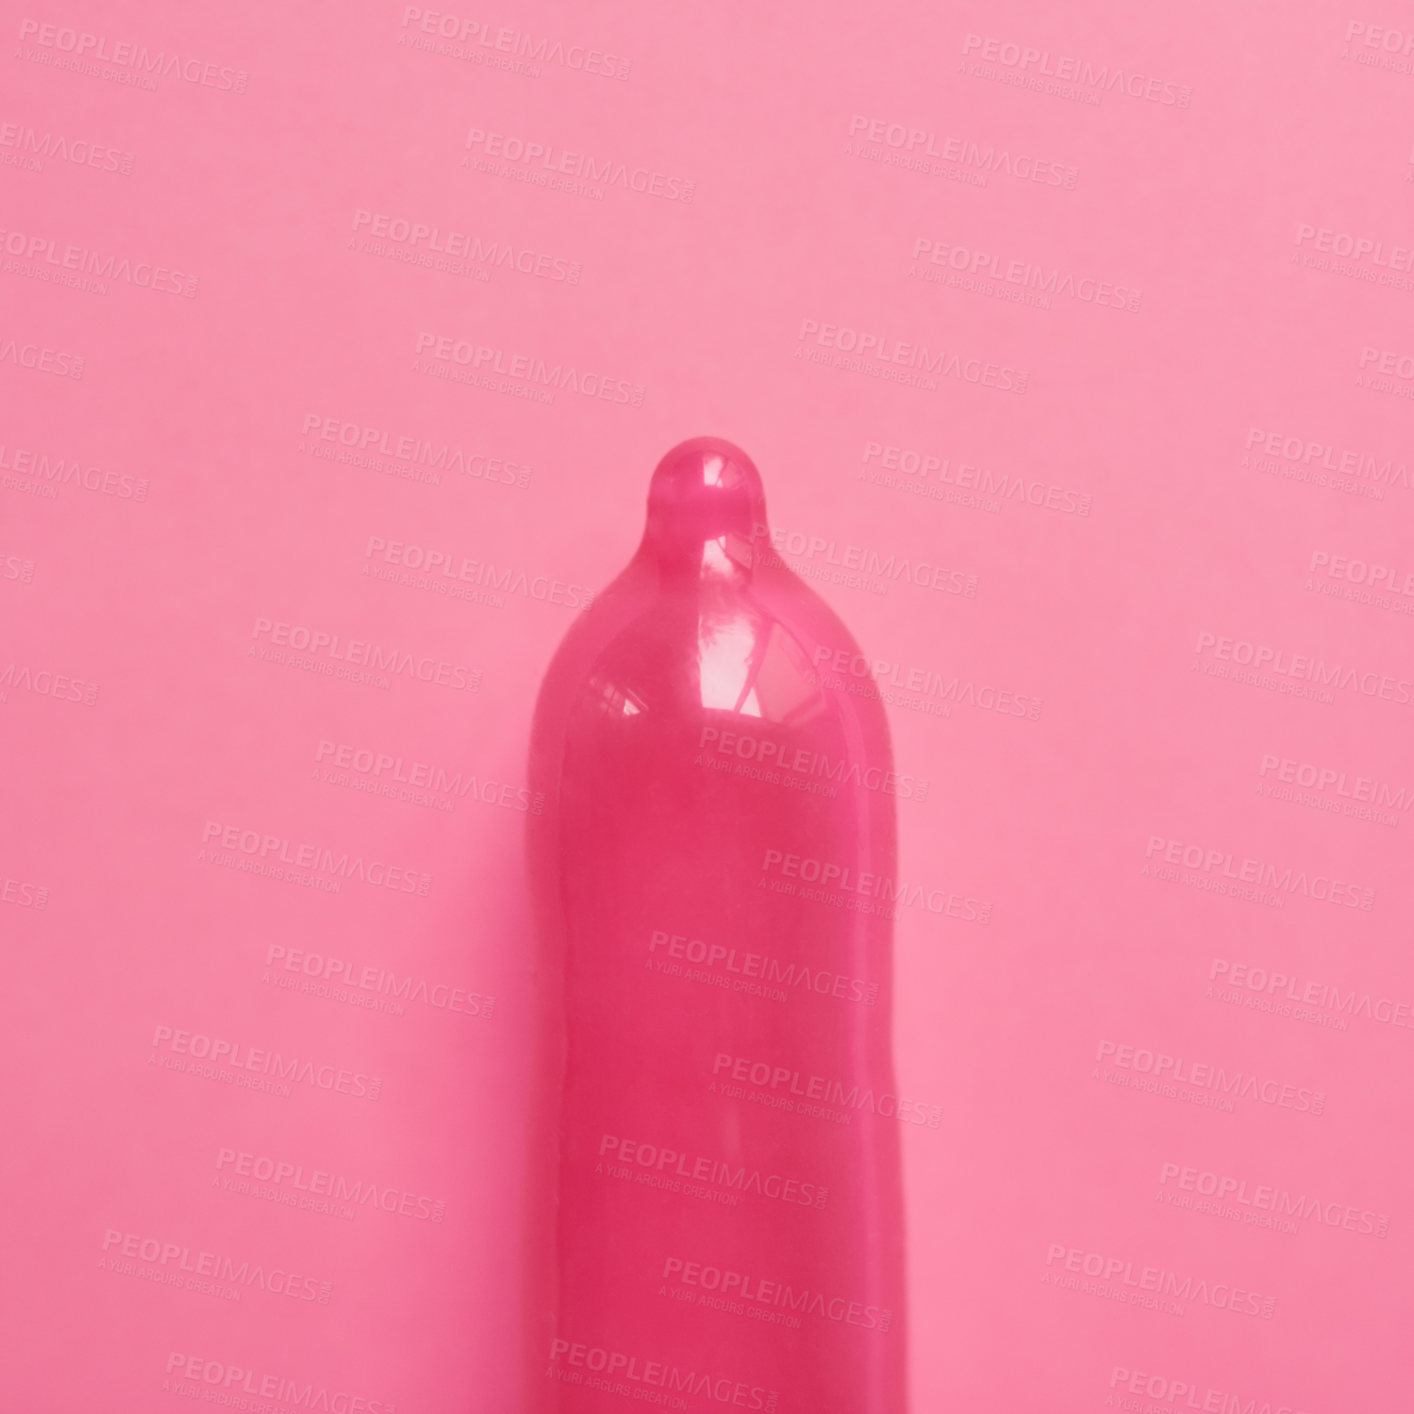 Buy stock photo Studio shot of a pink condom placed against a pink background